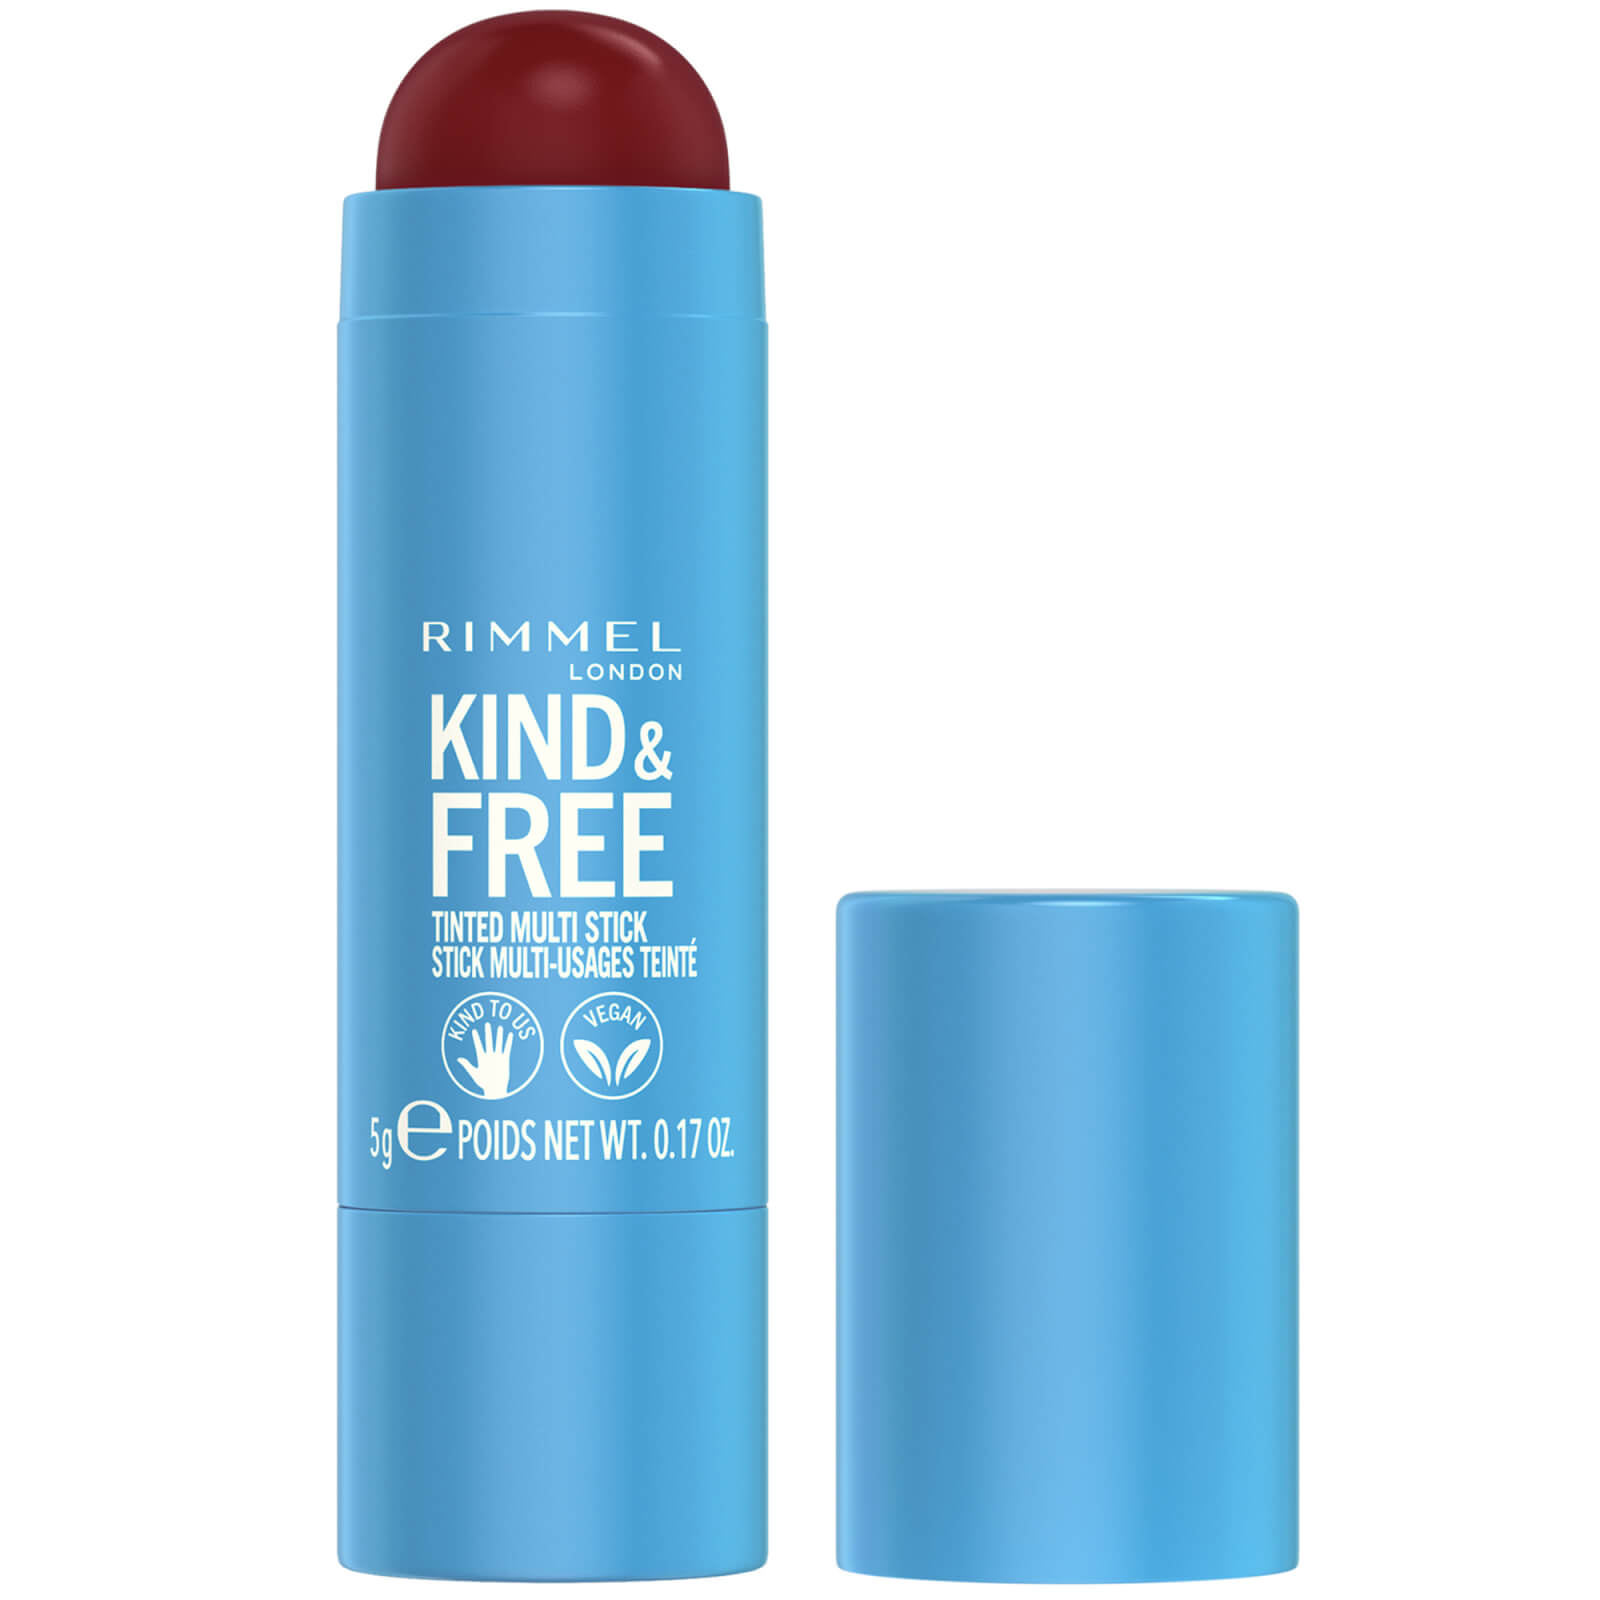 Rimmel Kind and Free Multi-Stick 5ml (Various Shades) - 005 Berry Sweet